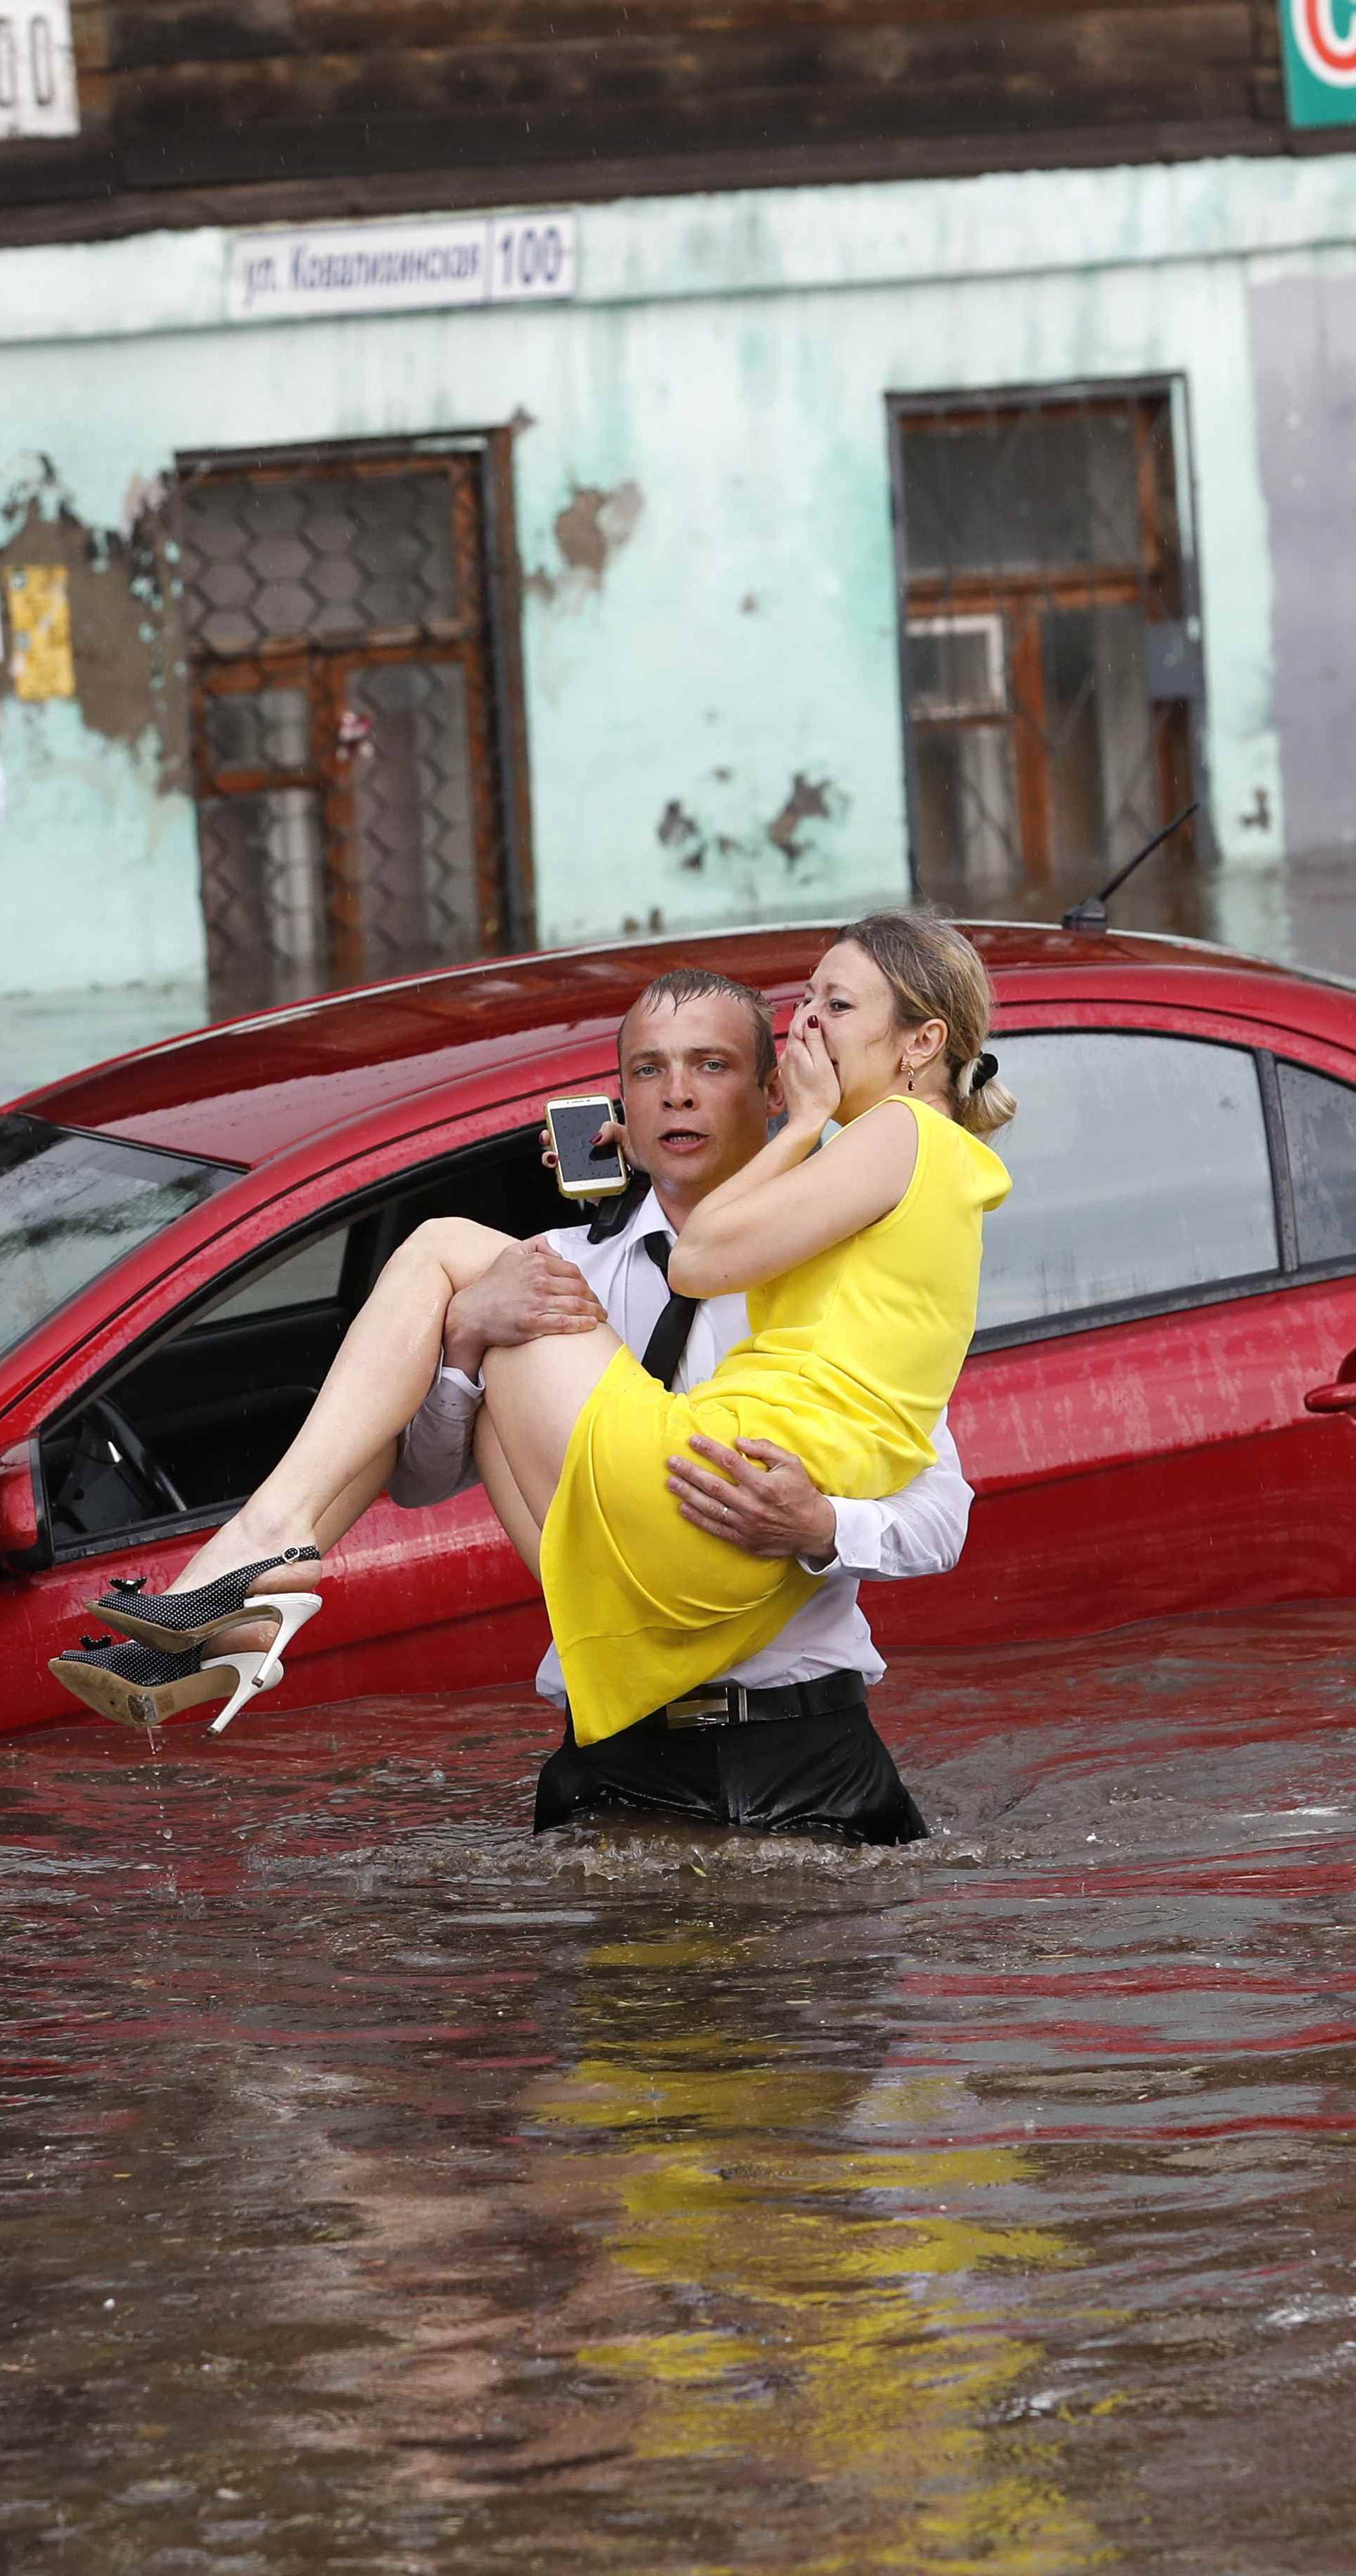 A woman is rescued from her flooded car at the street in Nizhny Novgorod